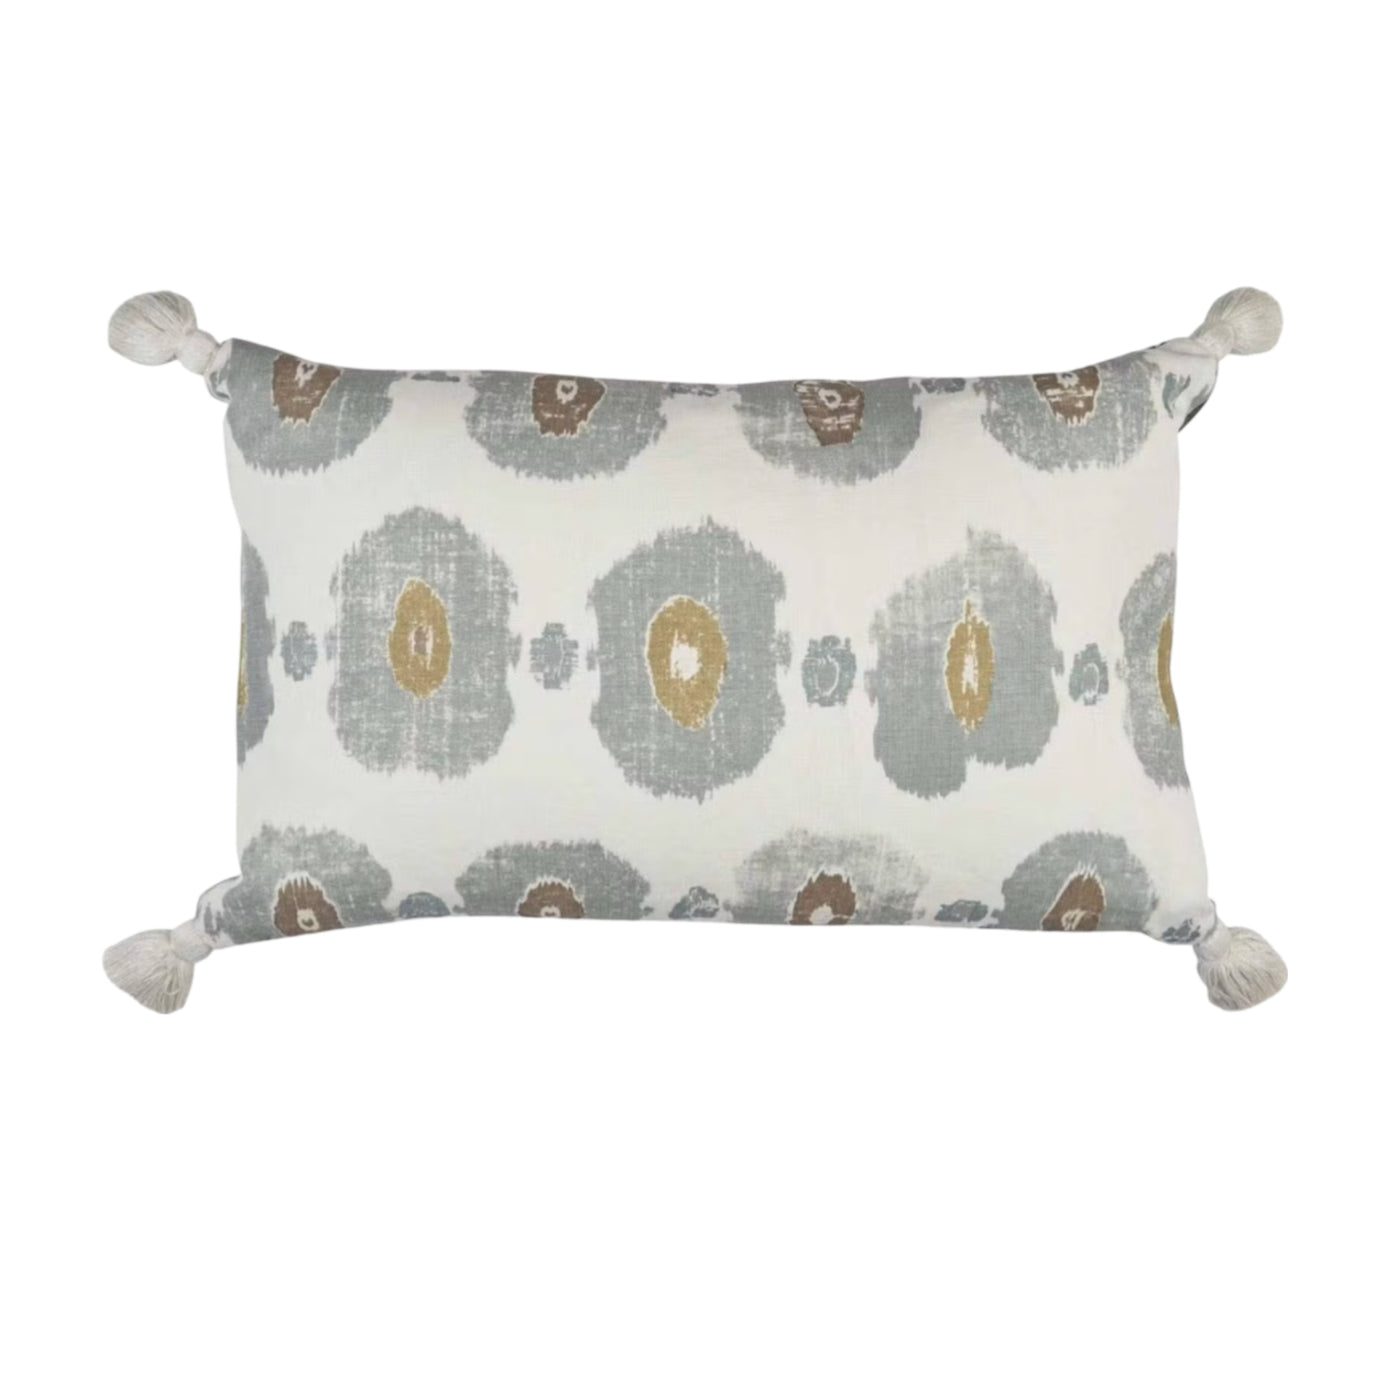 Penny Morrison Pillow with white tassels